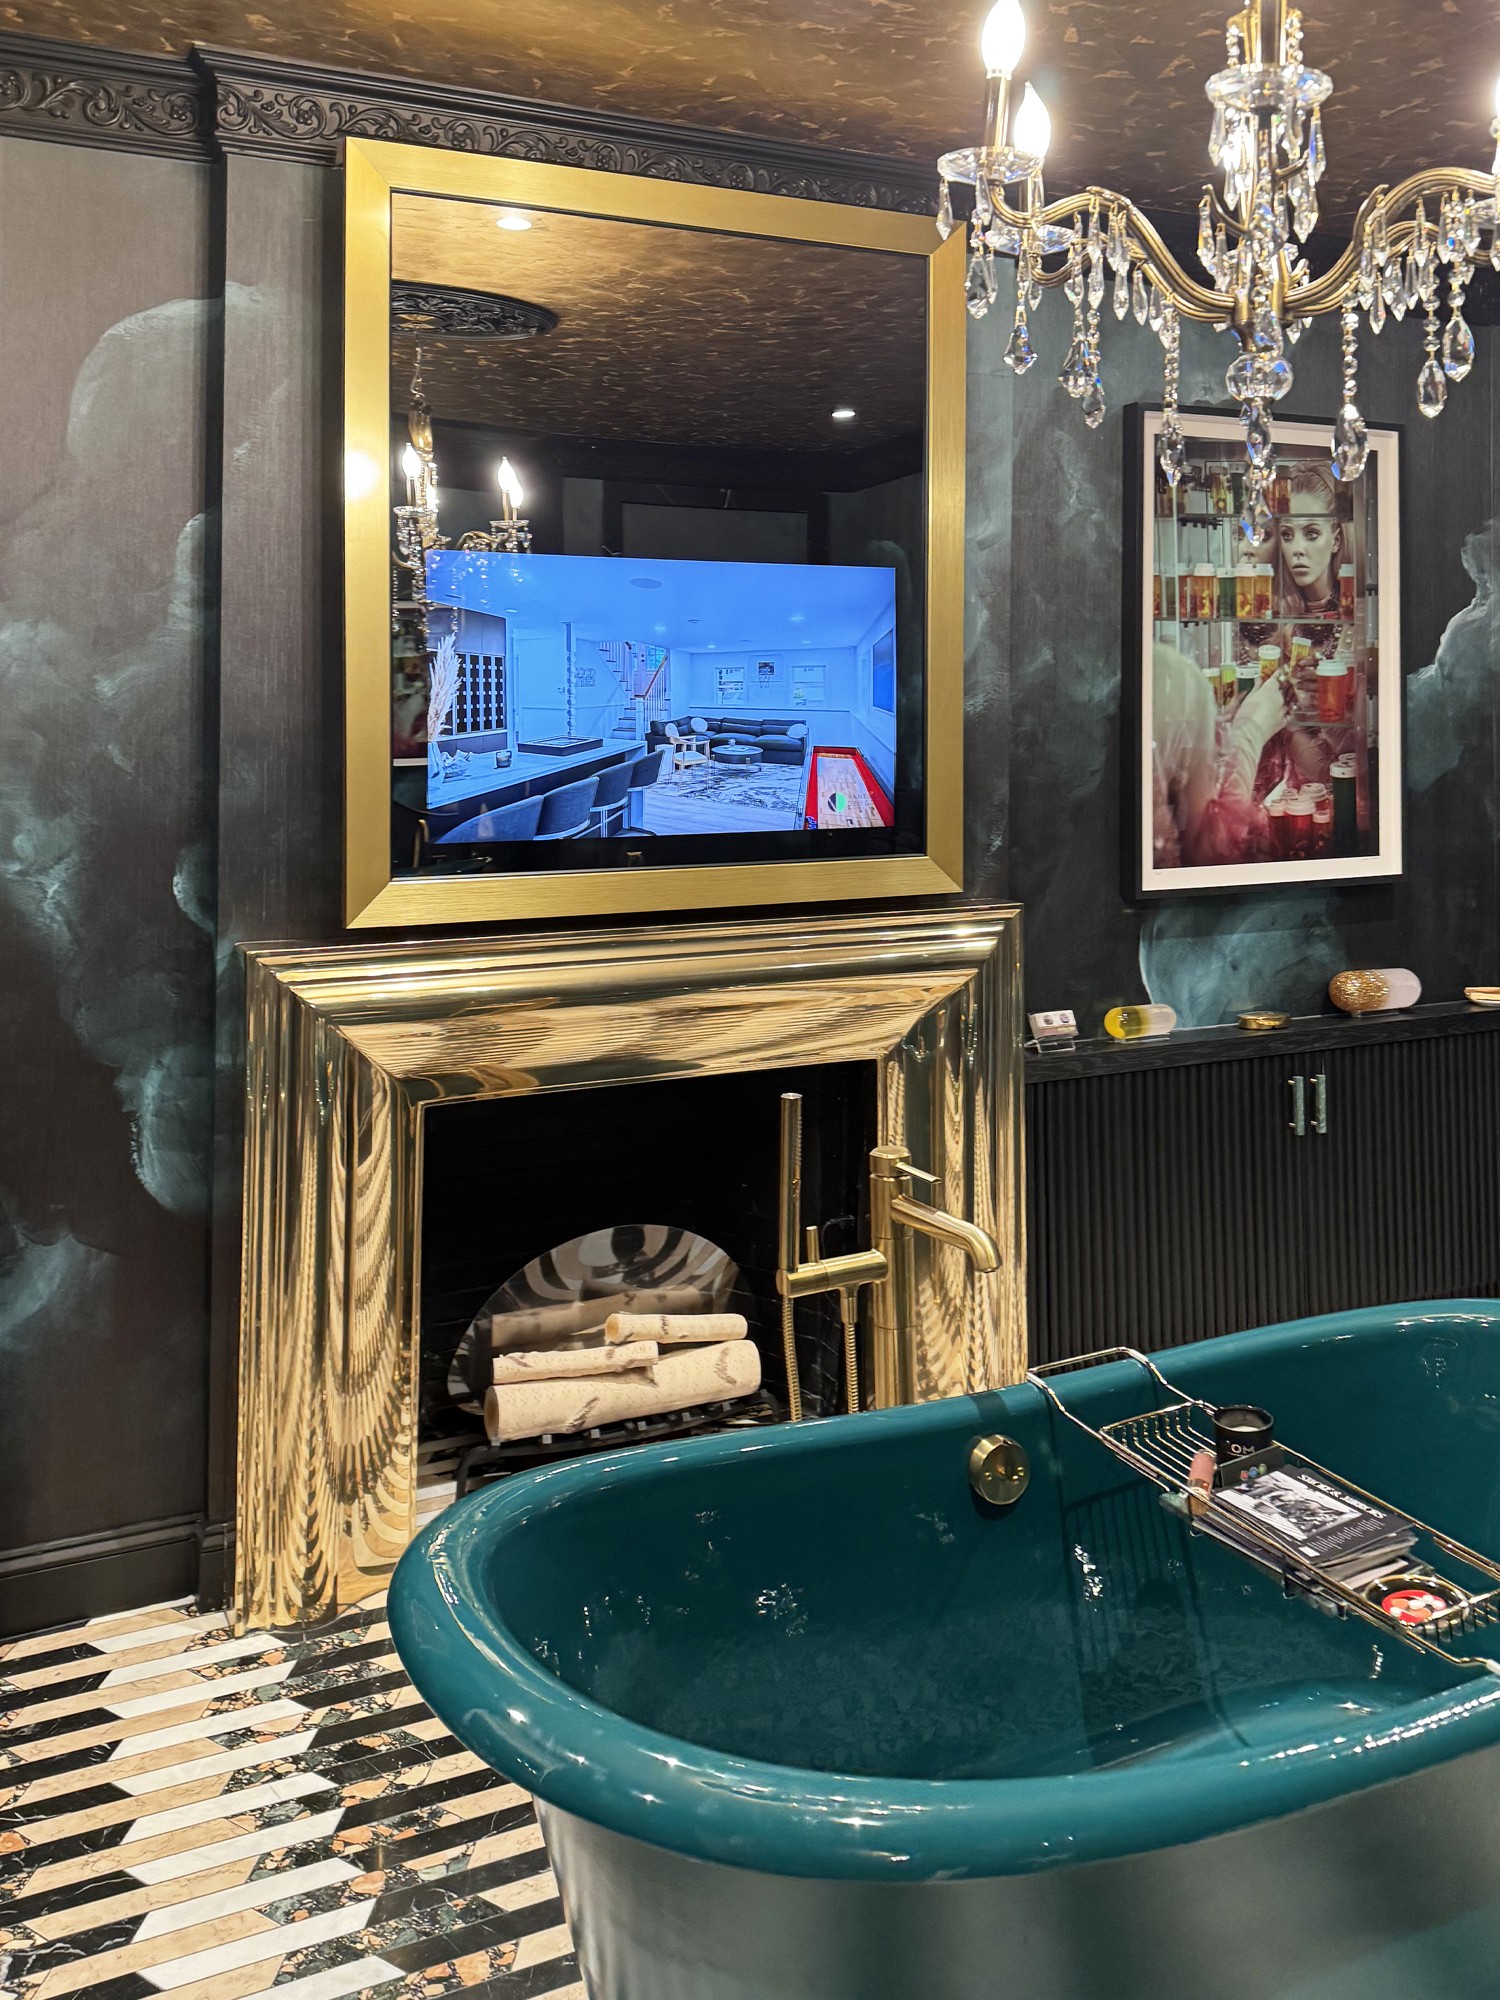 Gold Frame with TV on over a Gold Fireplace Mantel with a Green Tub in Center of the Room